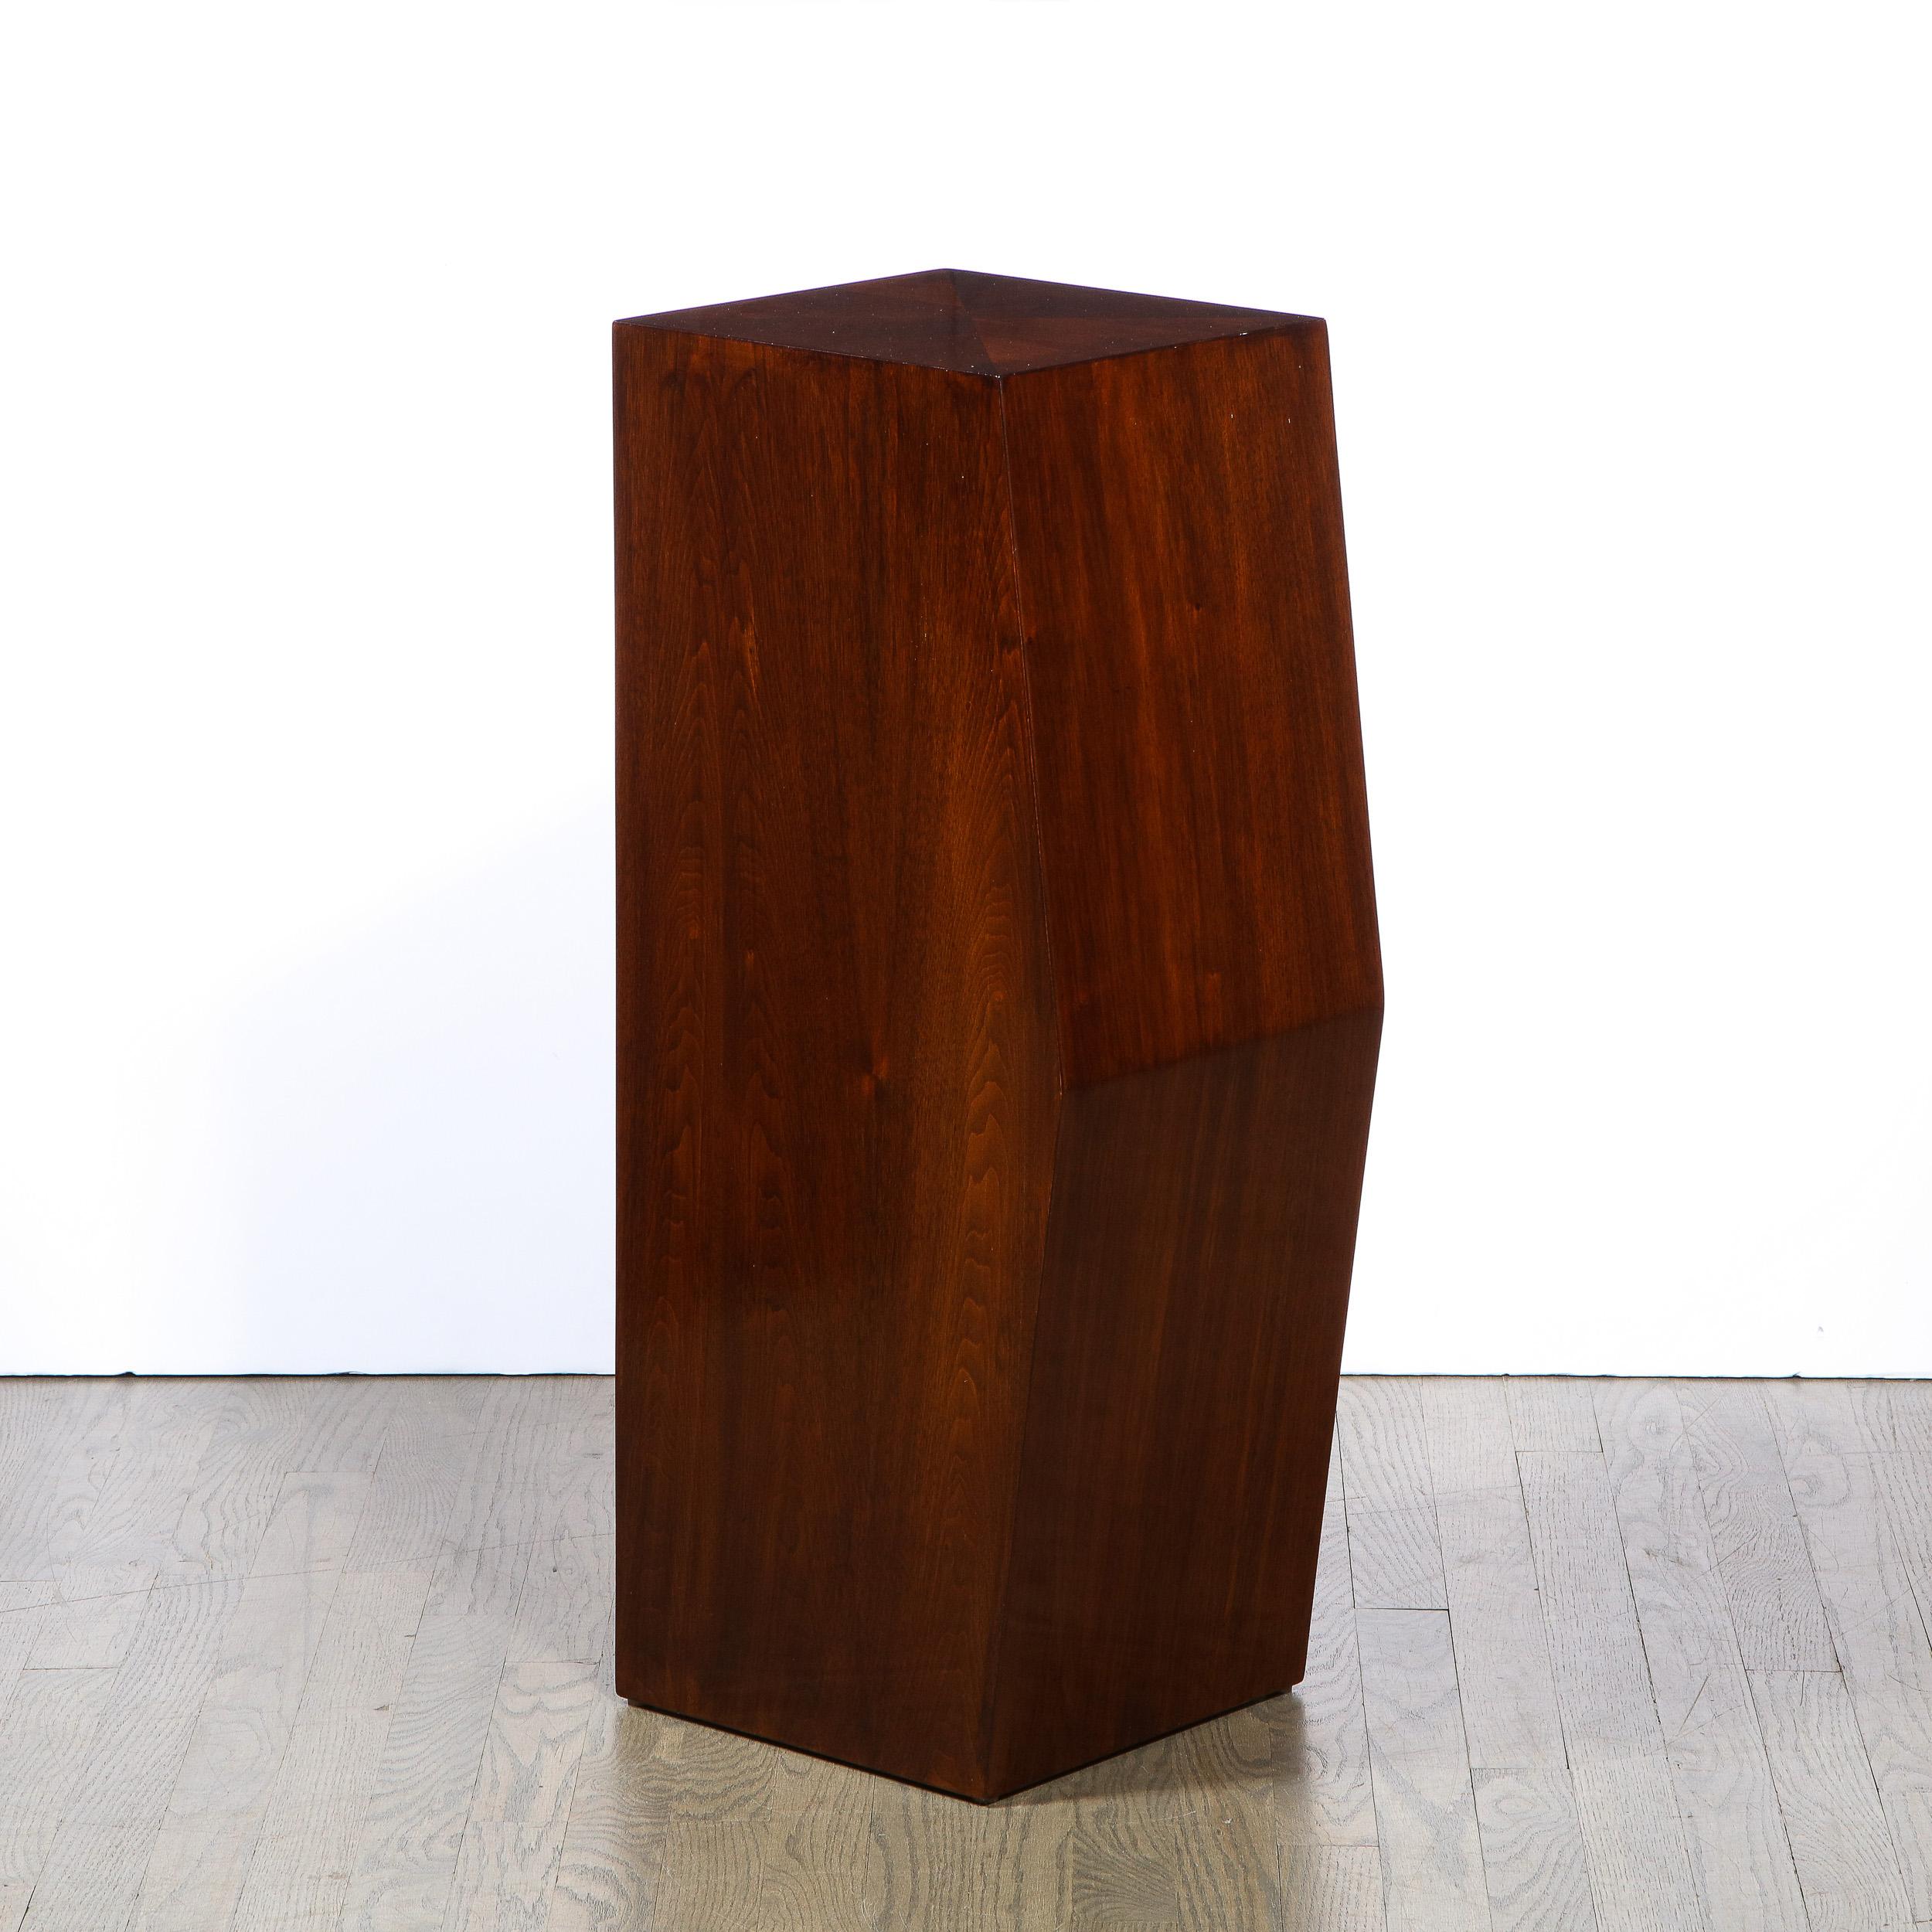 This elegant modernist pedestal was realized in the United States during the latter half of the 20th century. It Composed of bookmatched walnut, the pedestal offers a minimalist and austere volumetric rectangular form with one side that protrudes